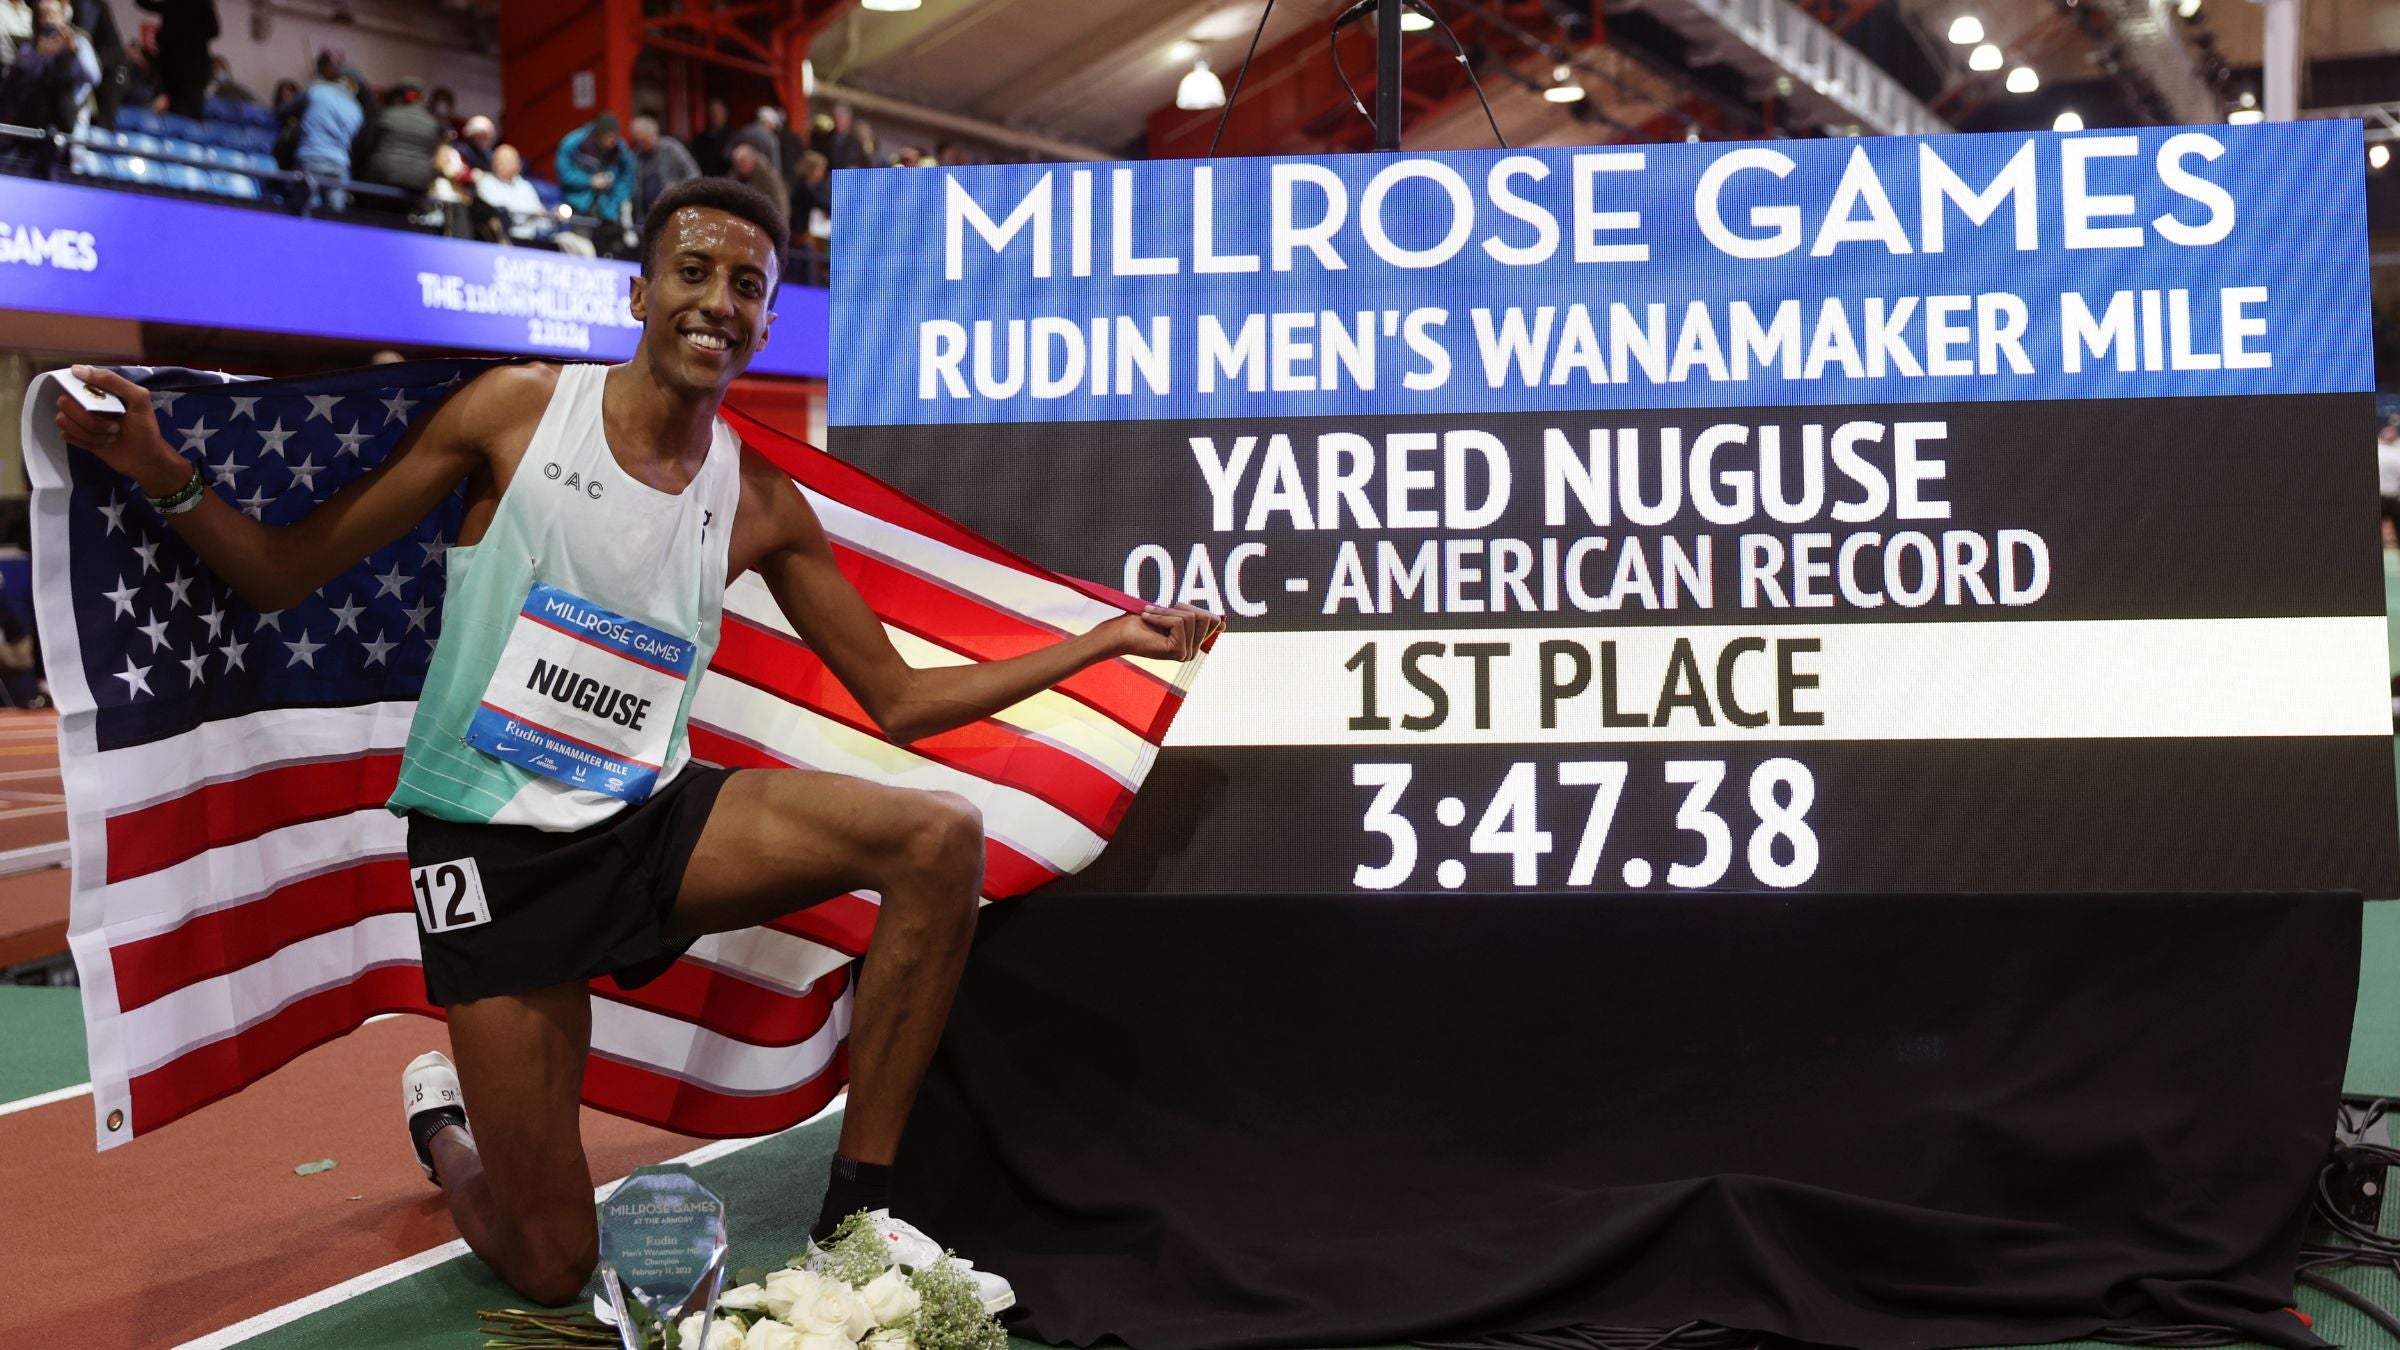 The Millrose Games Delivers Records and the Wanamaker Mile